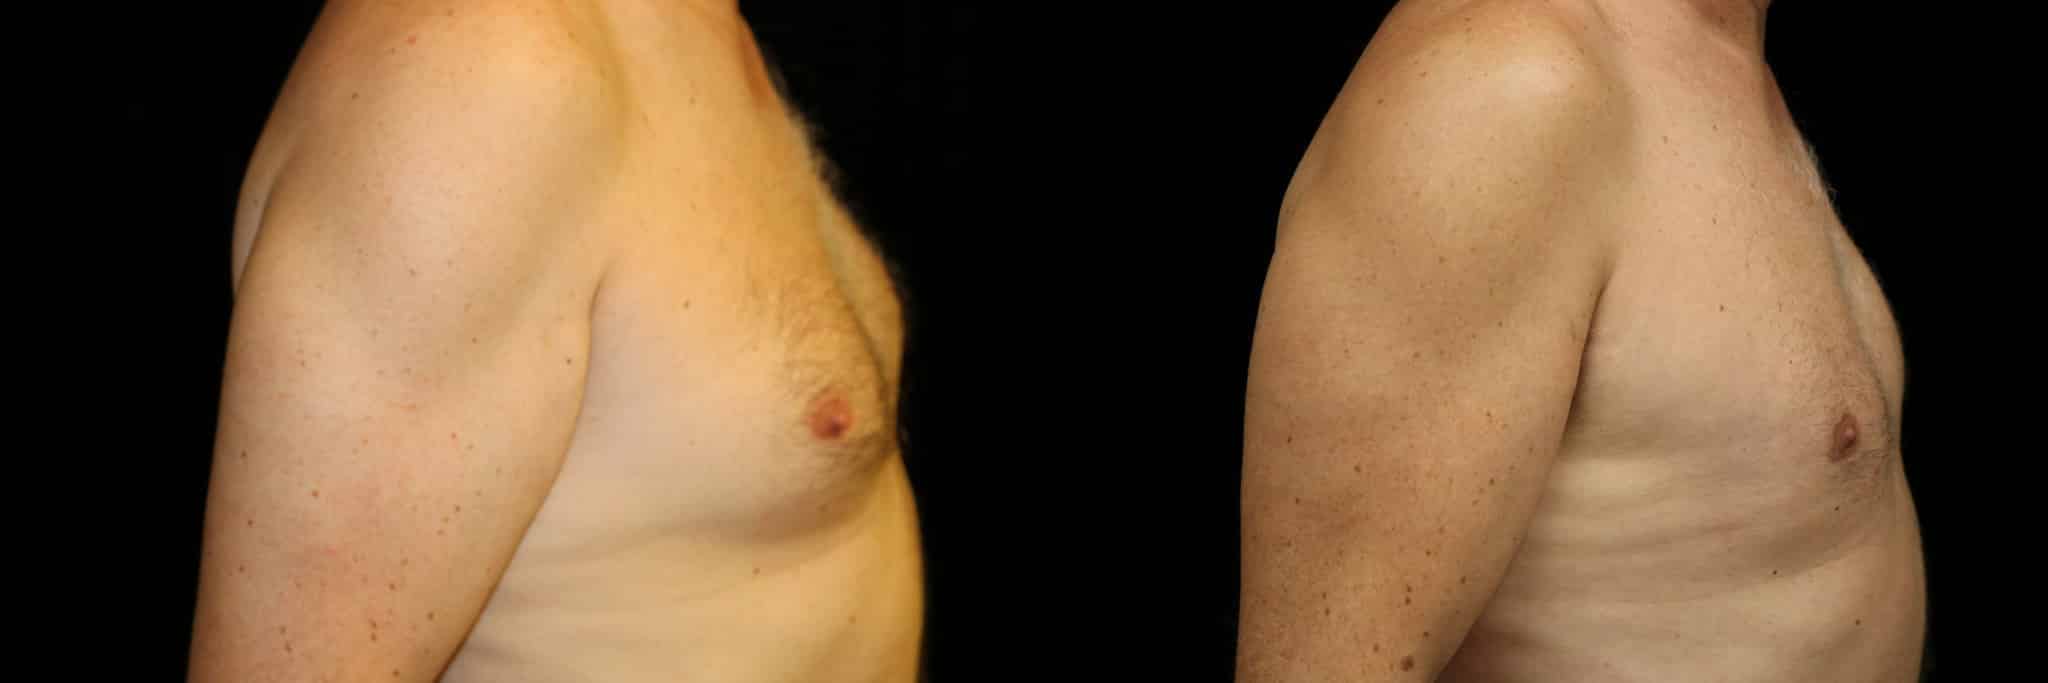 Gynecomastia Patient 15 Before & After Details